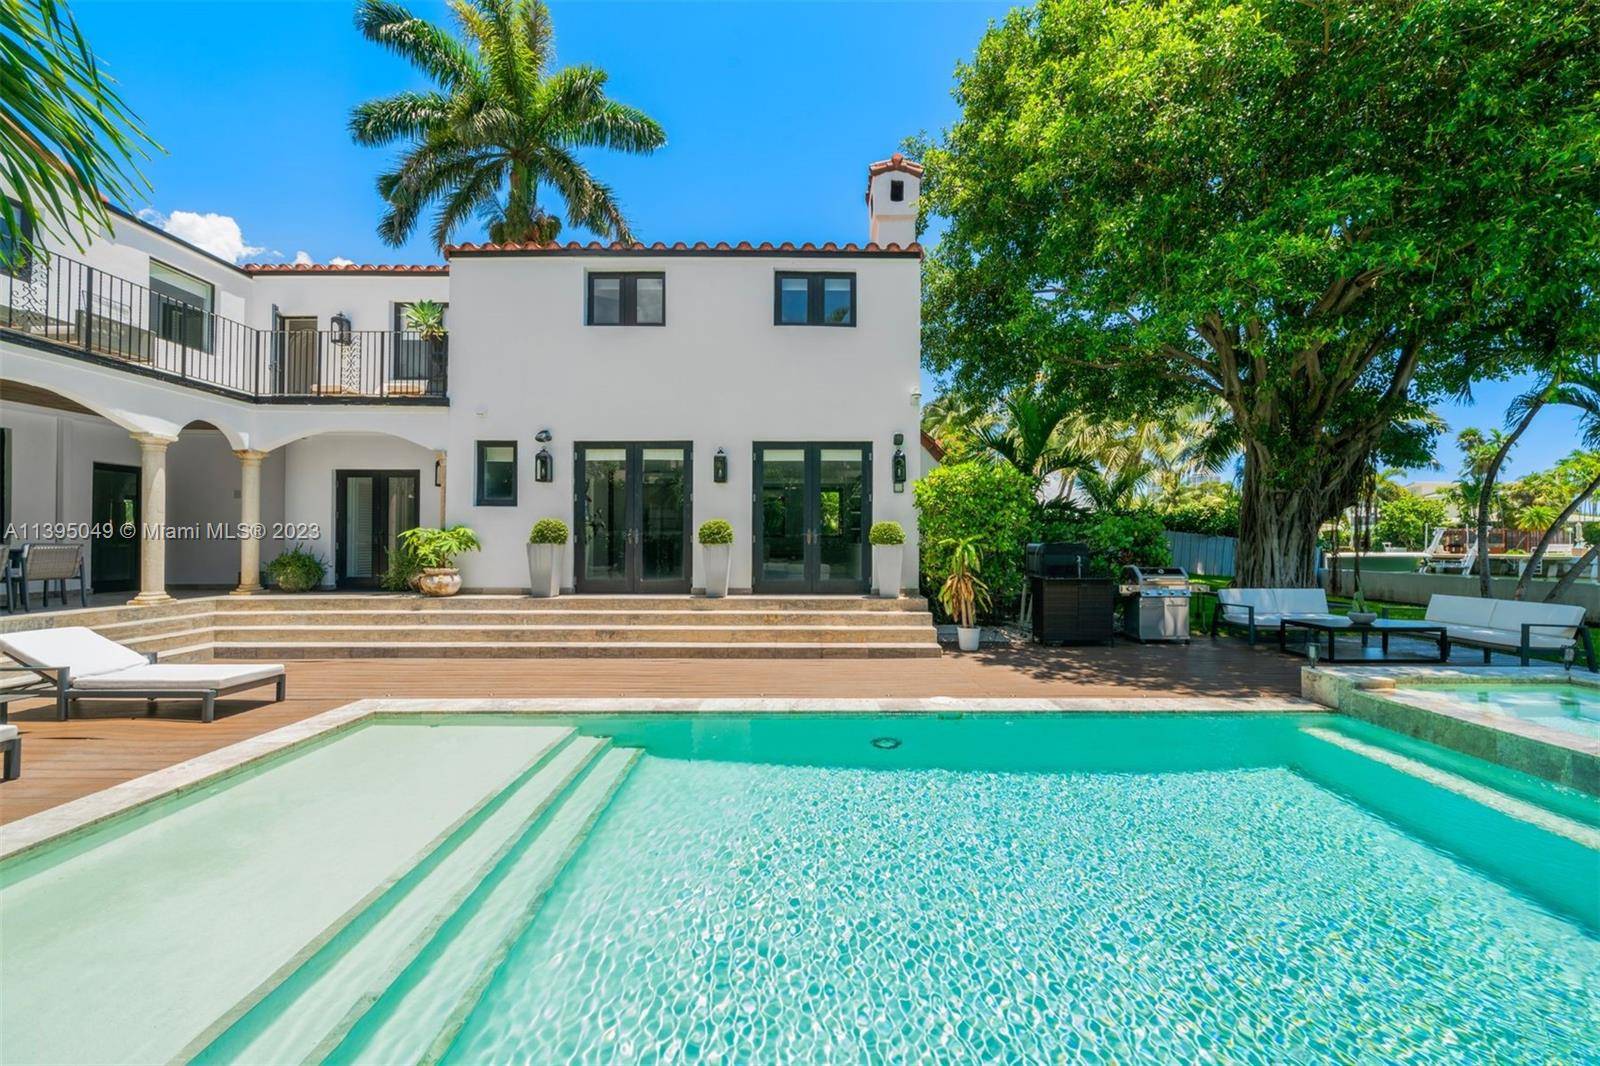 Enjoy living in this impeccably renovated waterfront oasis located in the heart of Miami Beach !